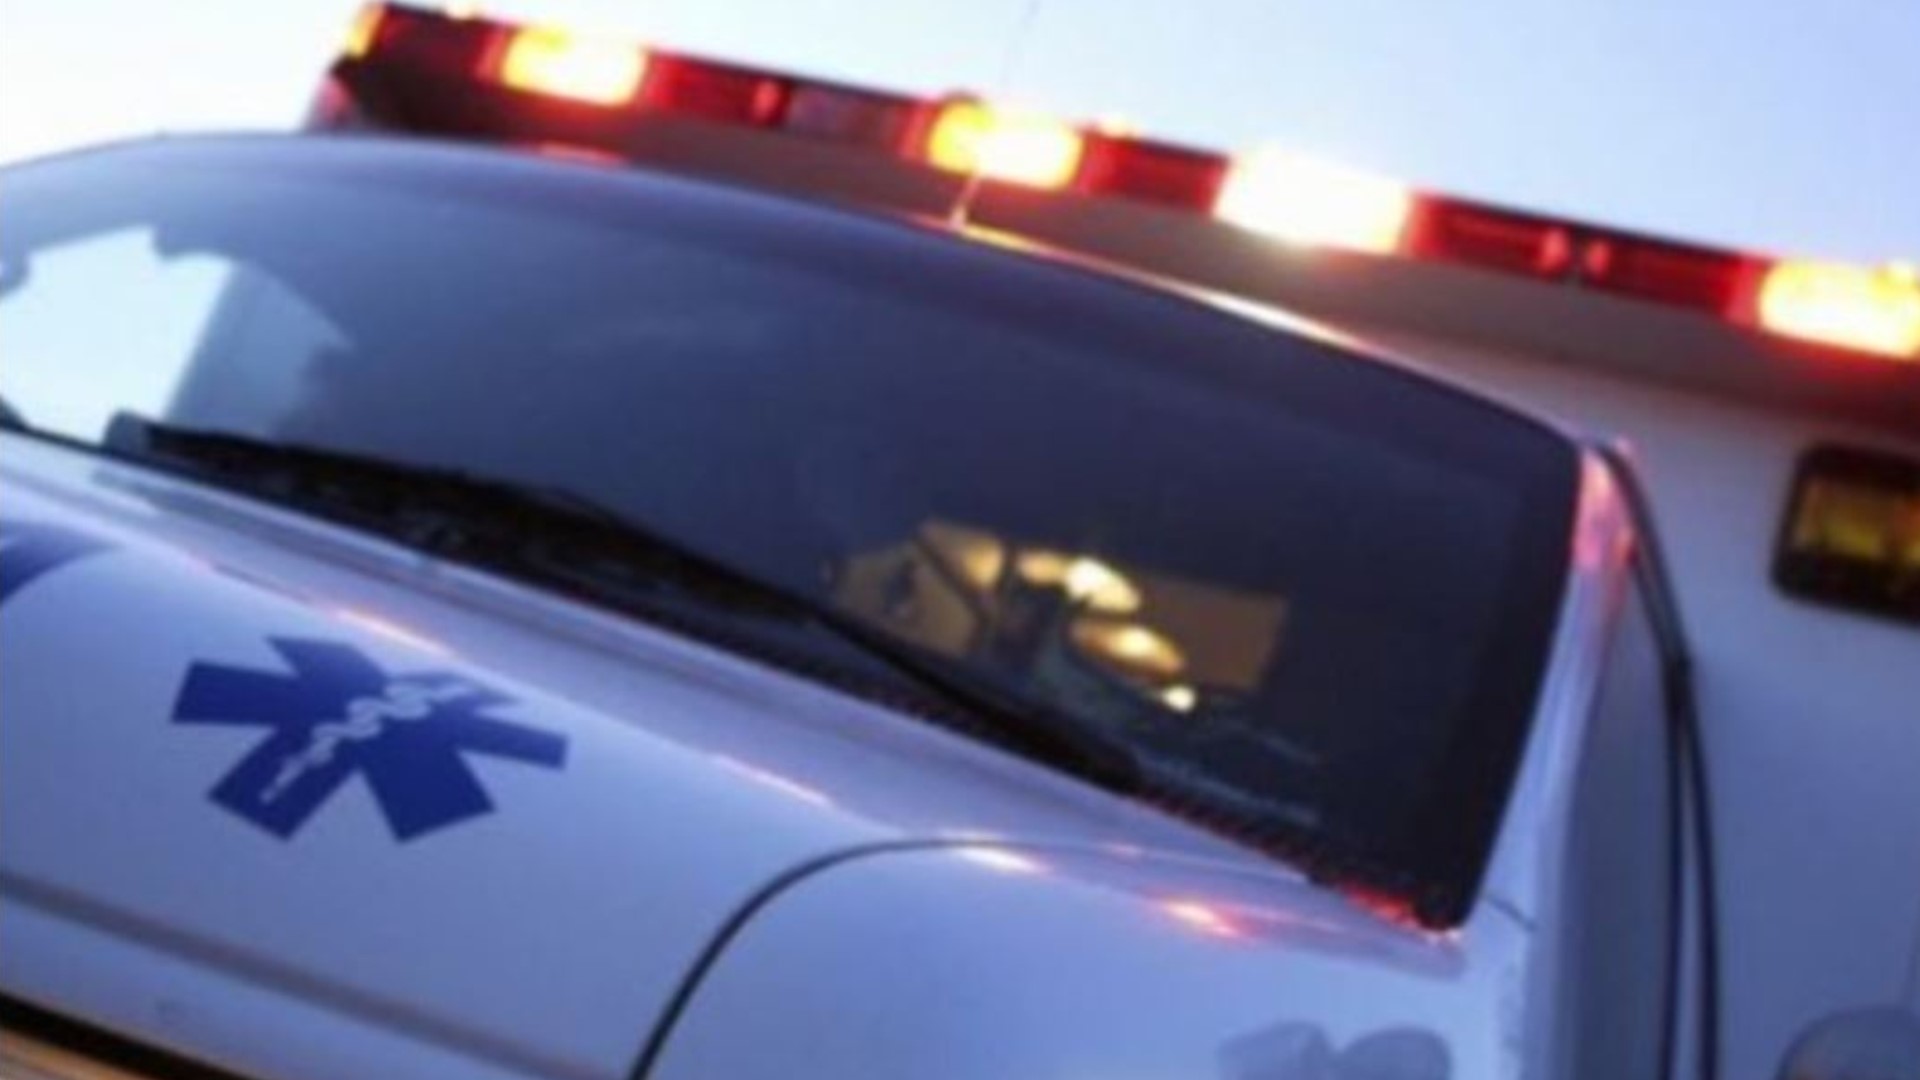 A 40-year-old man was walking along Delk Road on Sunday night when he was struck by a white truck that left the scene.